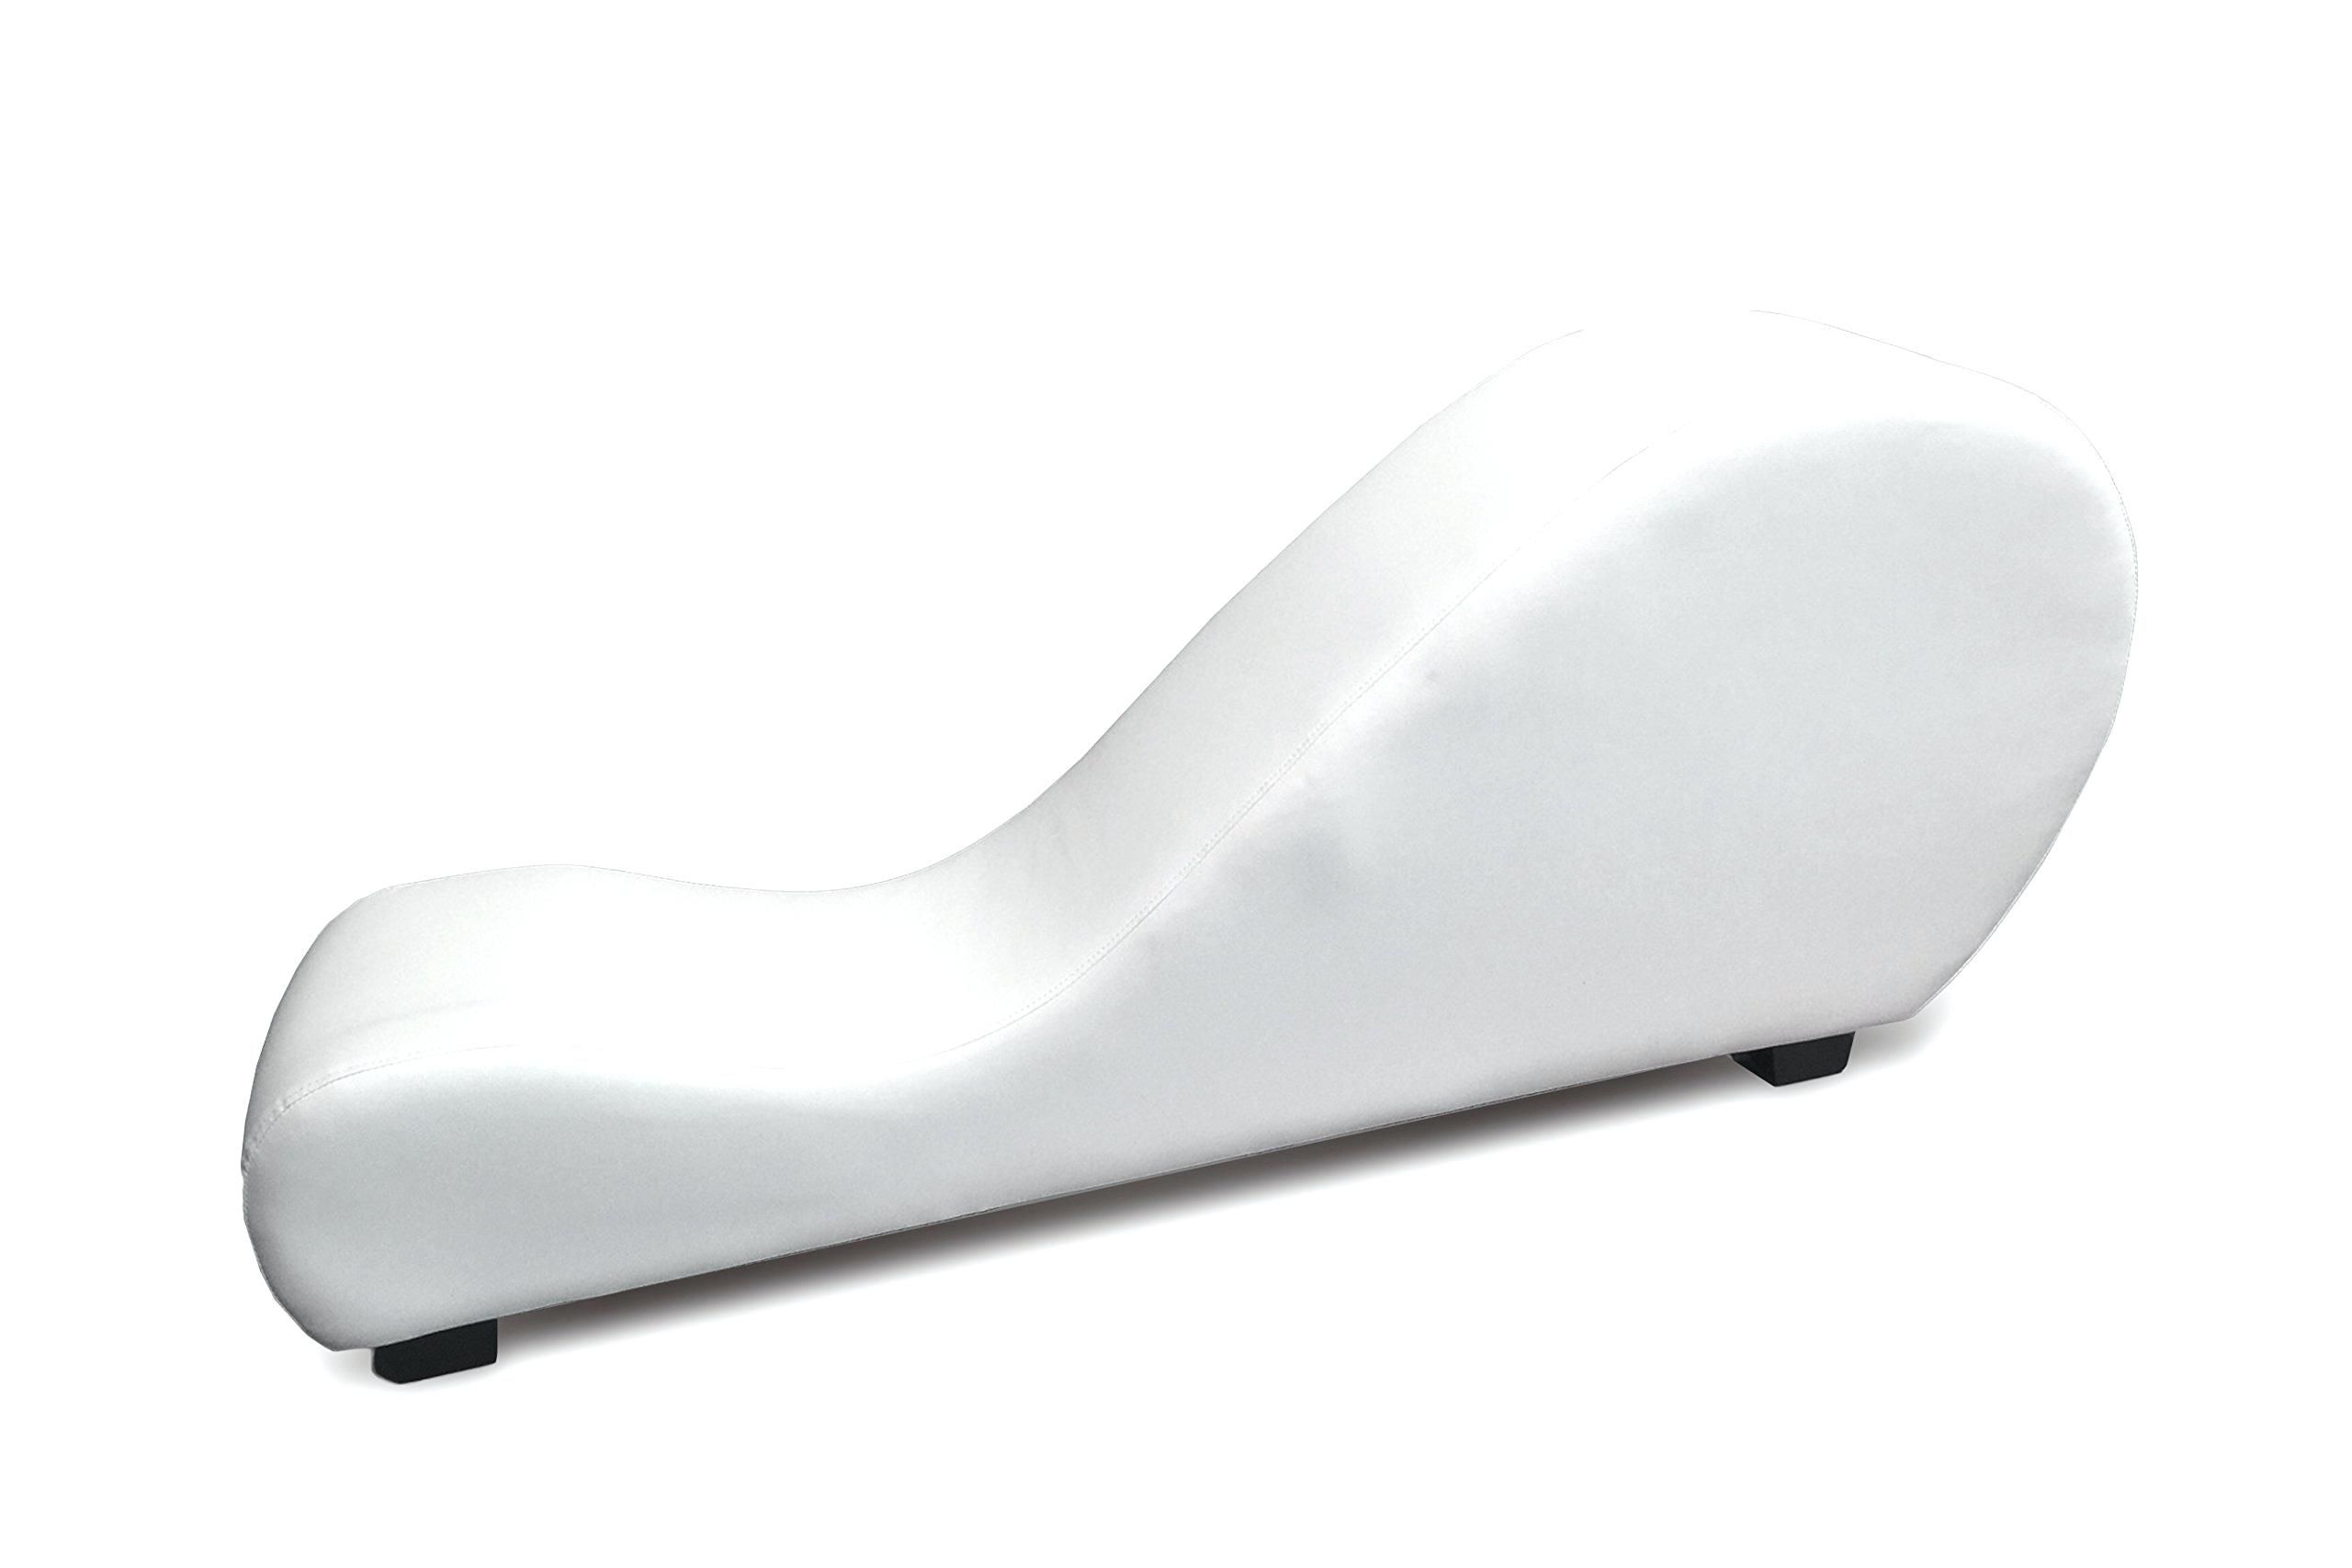 Widely Used Exotic Chaise Lounge Chairs With Regard To Chaise: Tantra Chaise Lounge. Tantric Chaise Lounge (View 14 of 15)